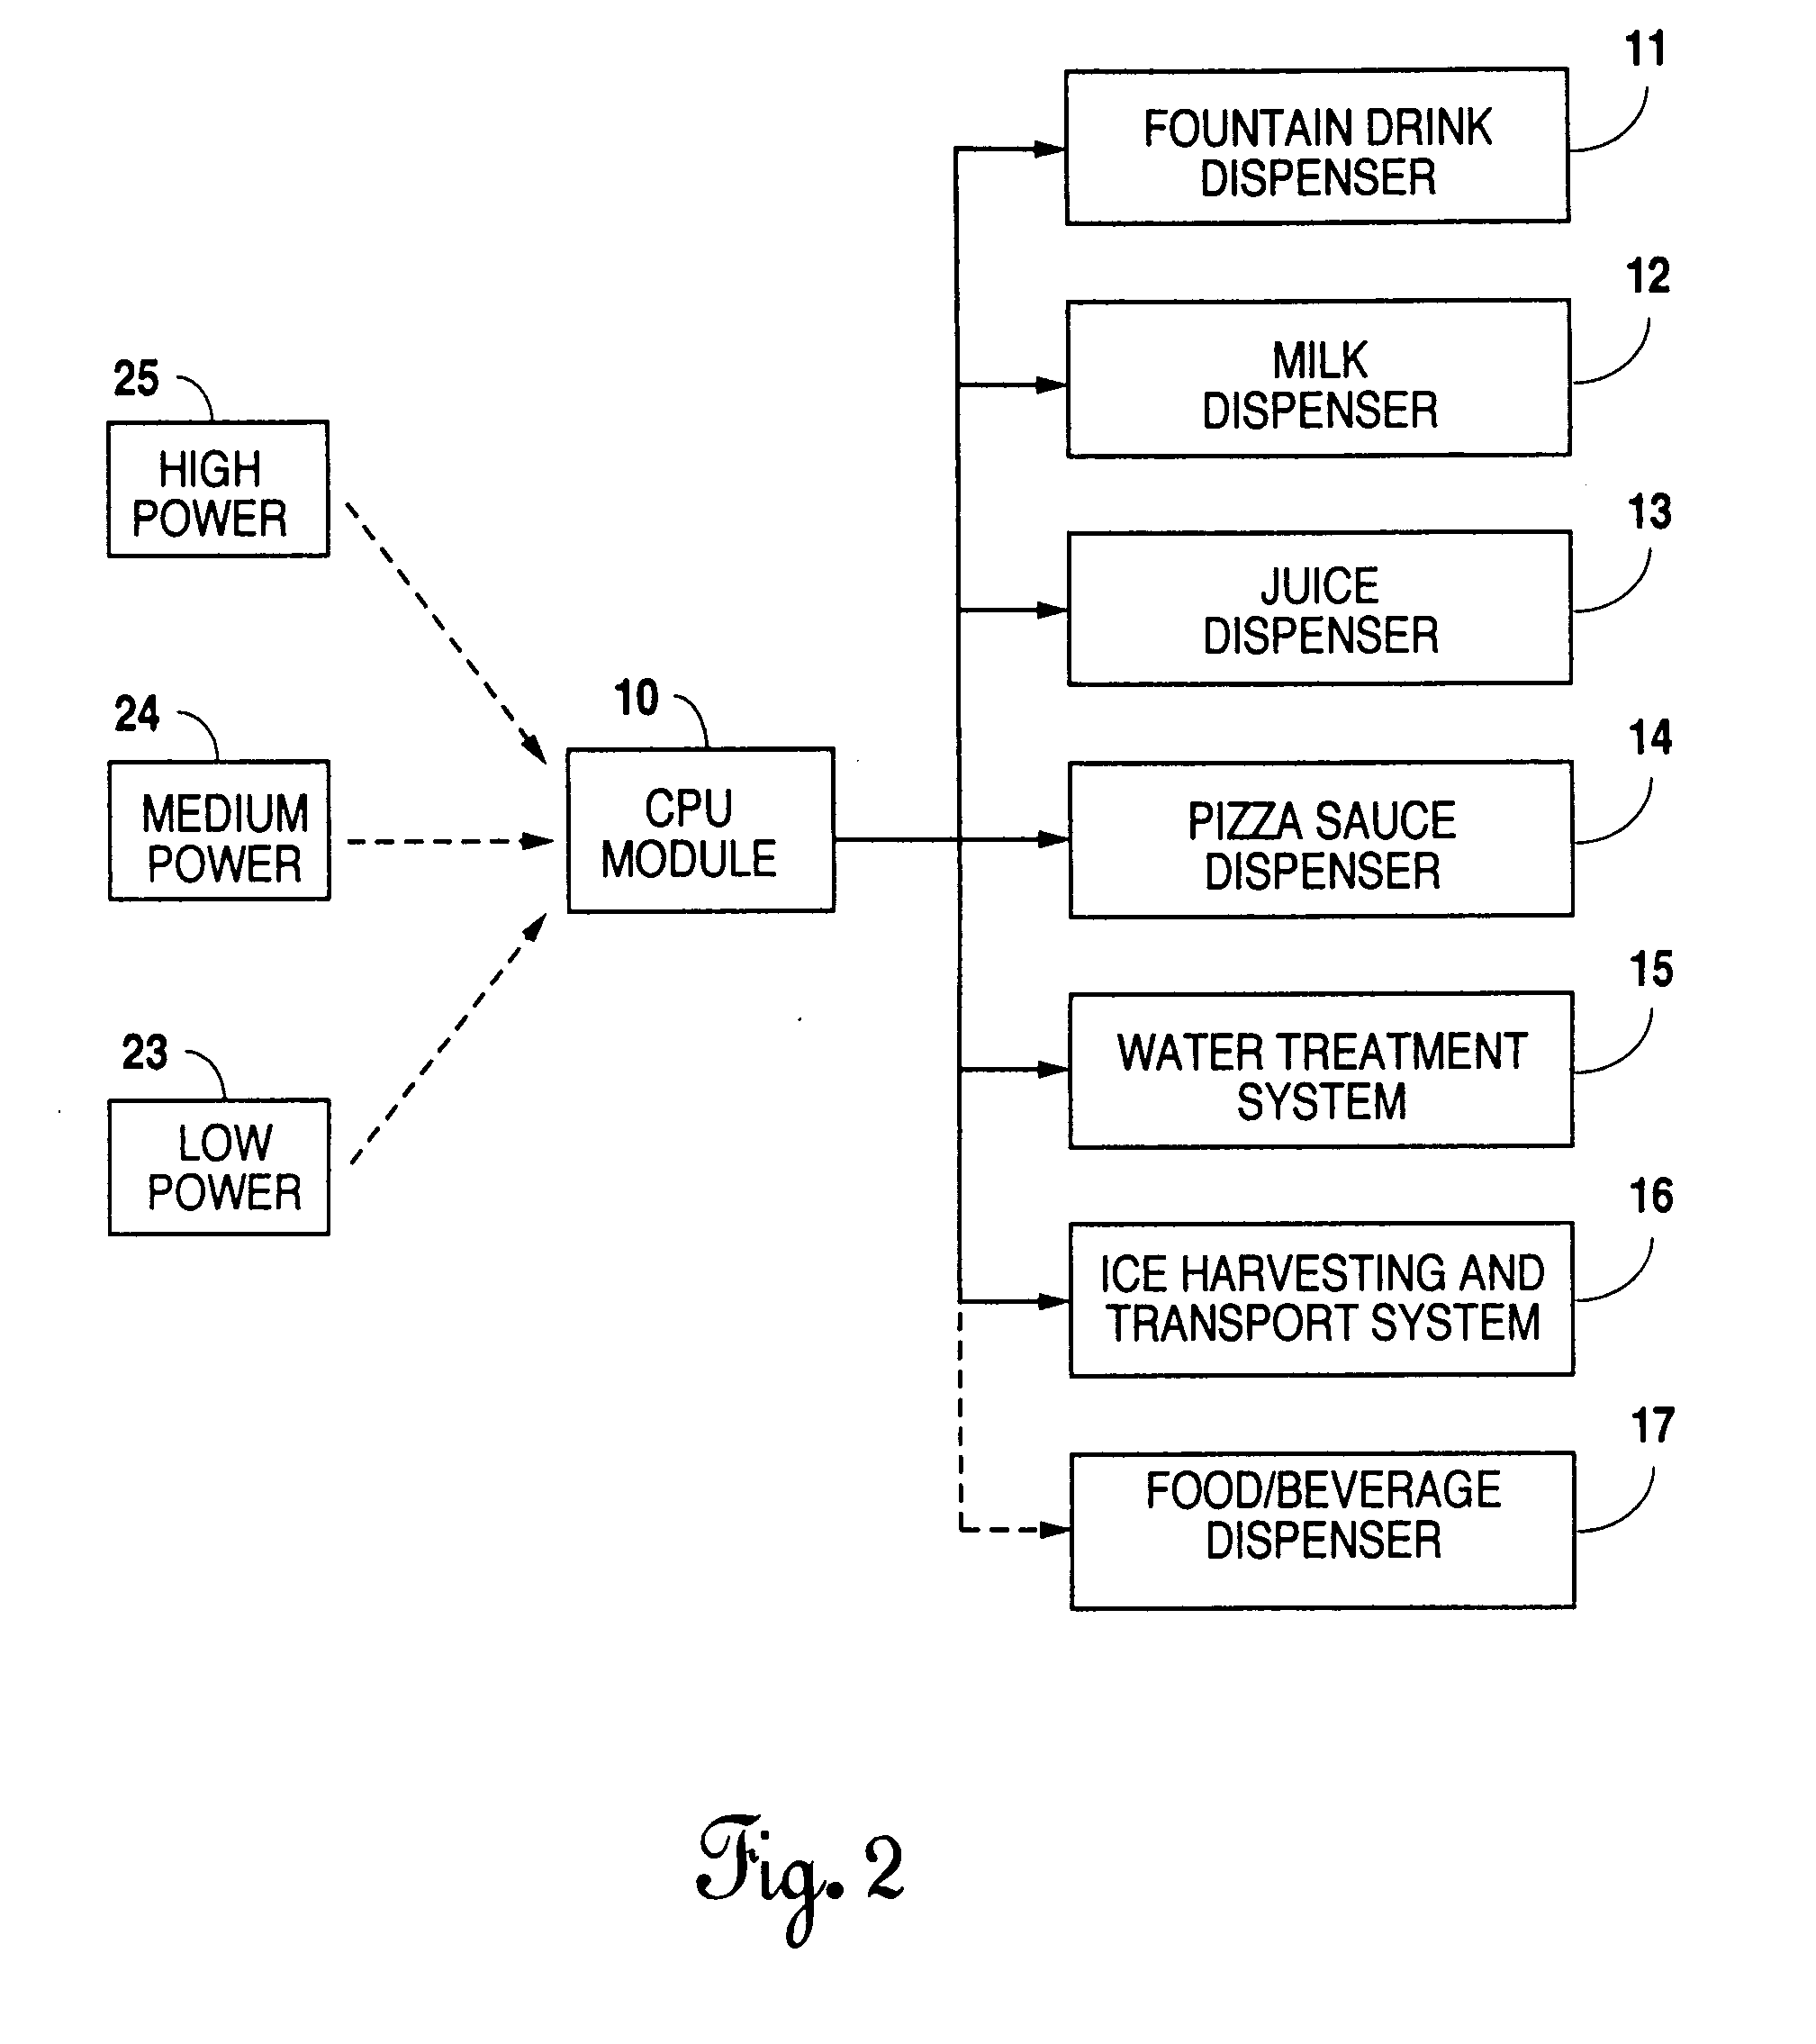 Distributed architecture for food and beverage dispensers